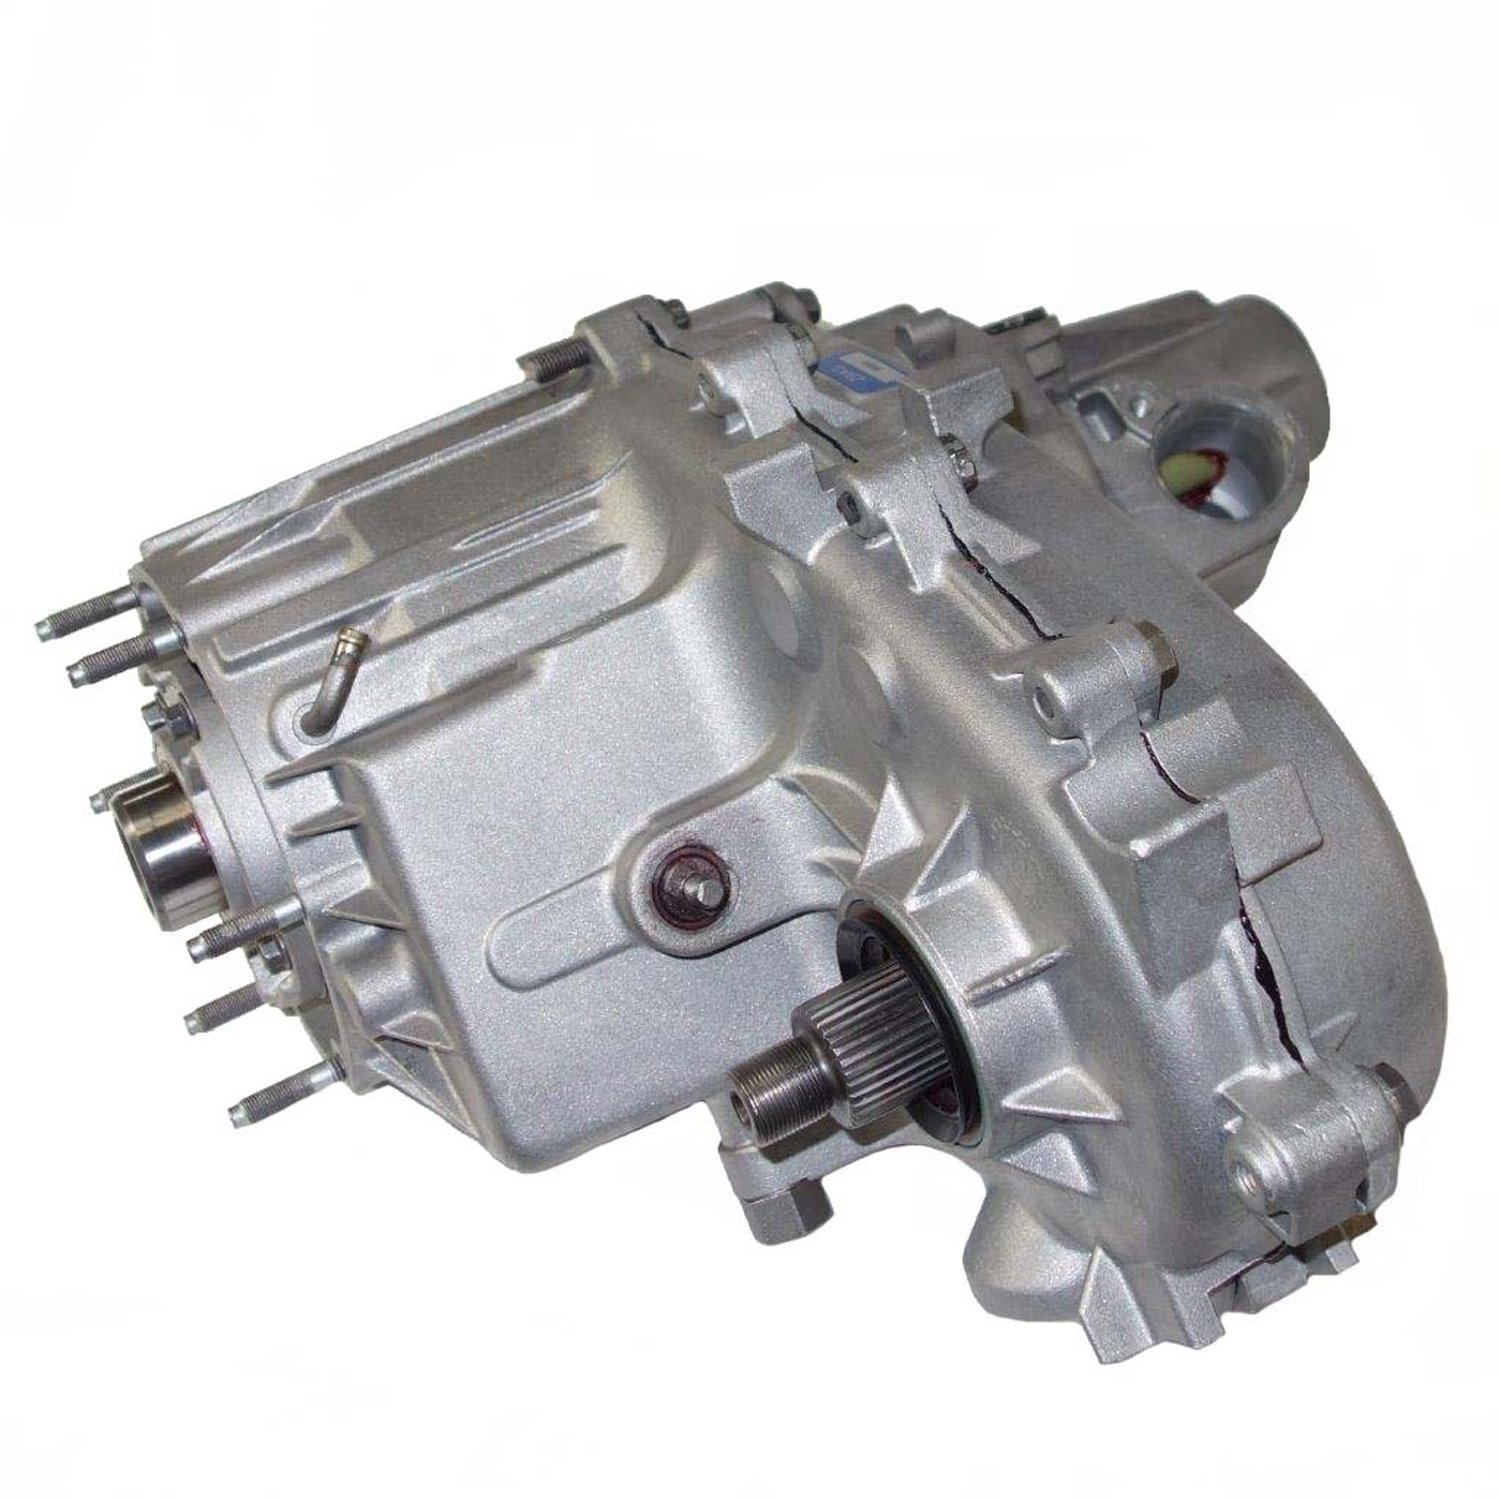 Remanufactured NP249 Transfer Case For 1993-1995 Jeep Grand